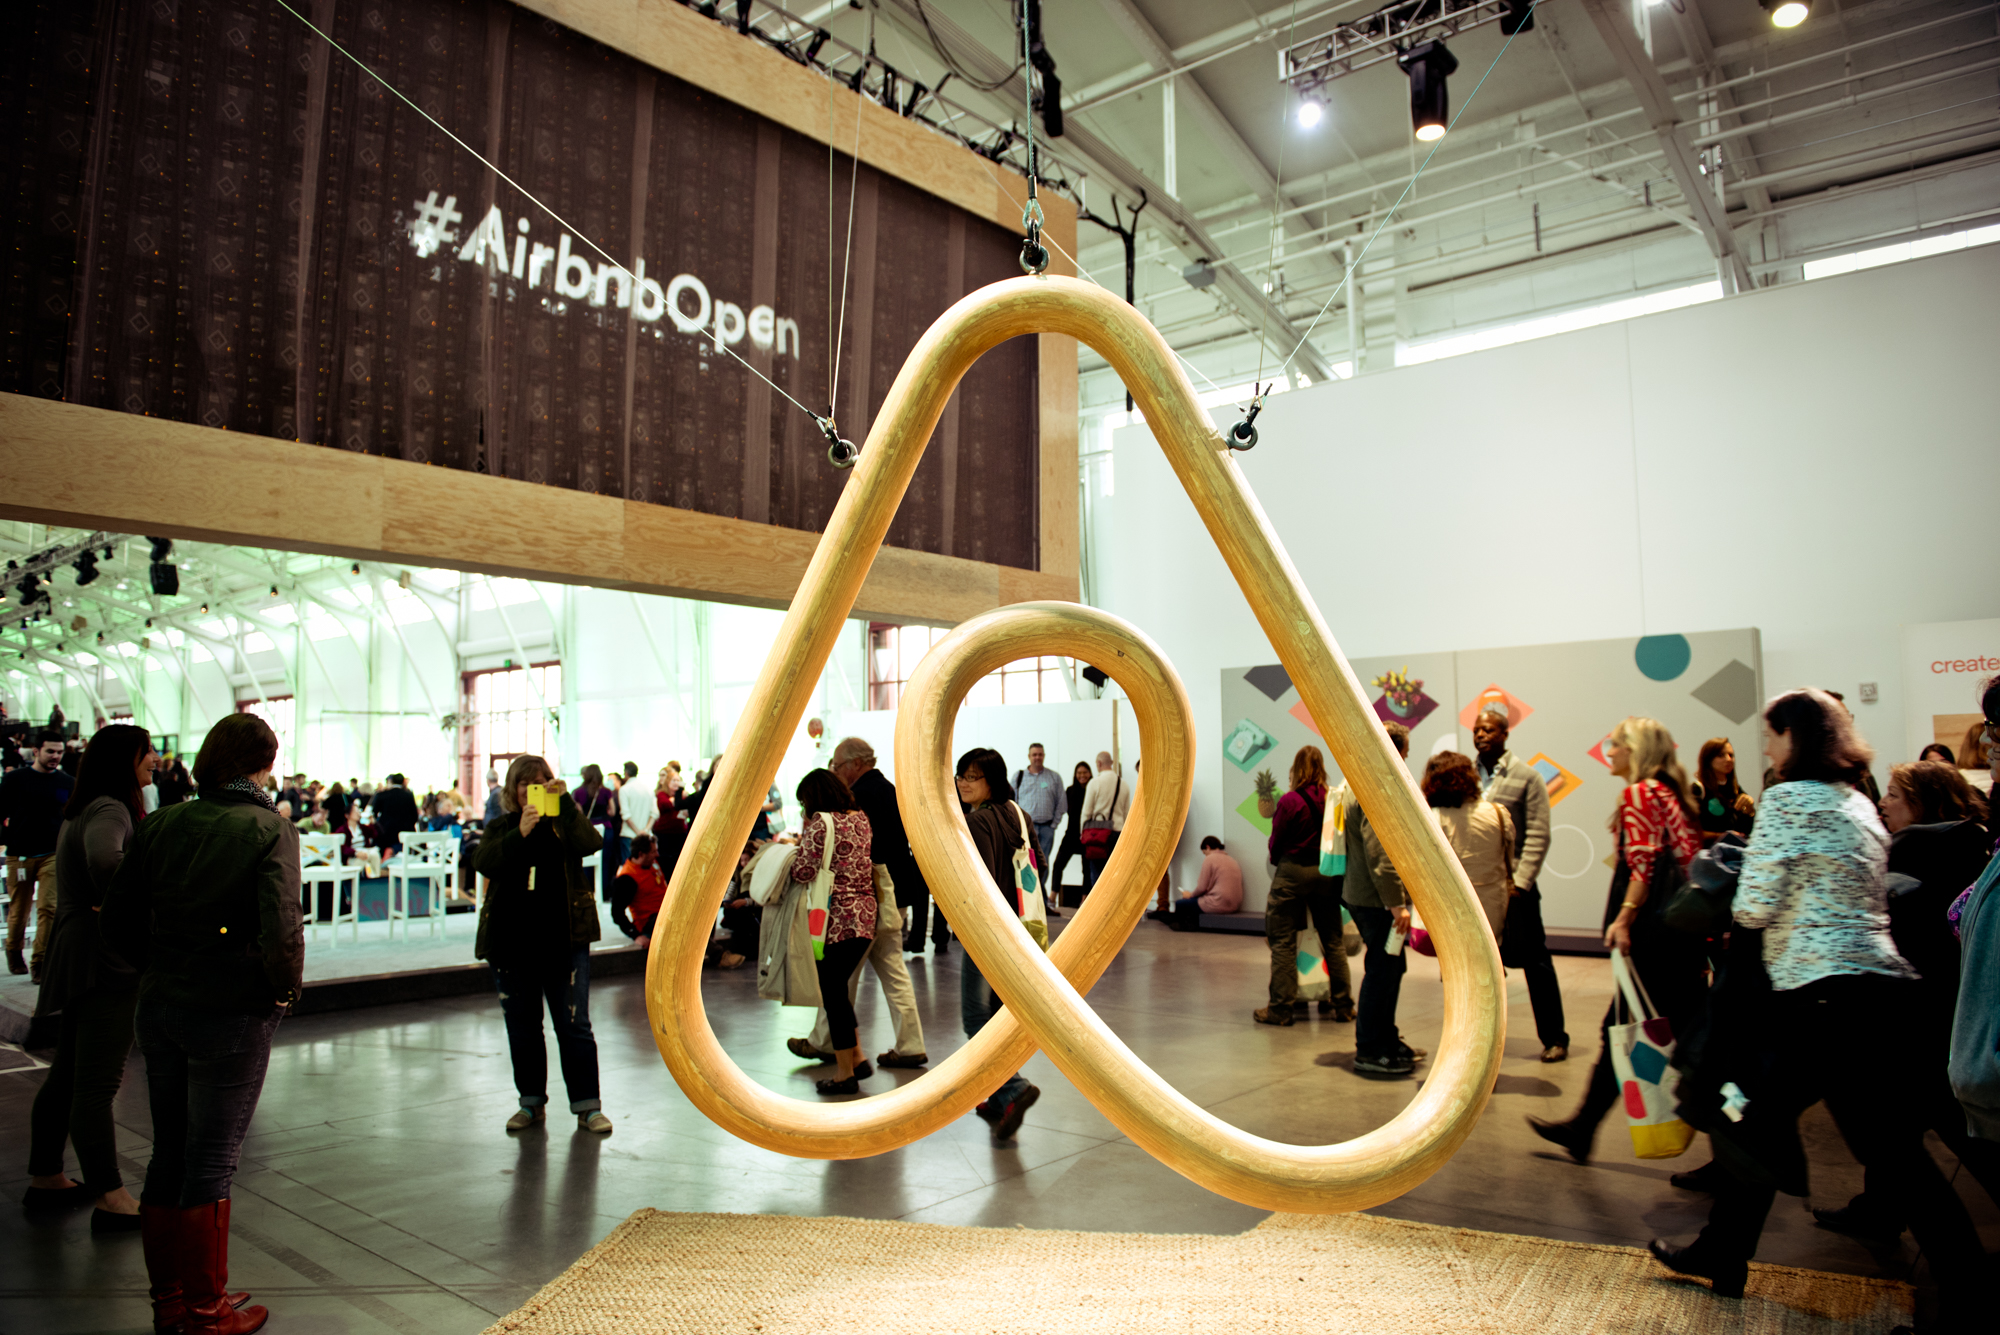 Airbnb is surely the industrys largest recent disruptor but could it be good for hospitality